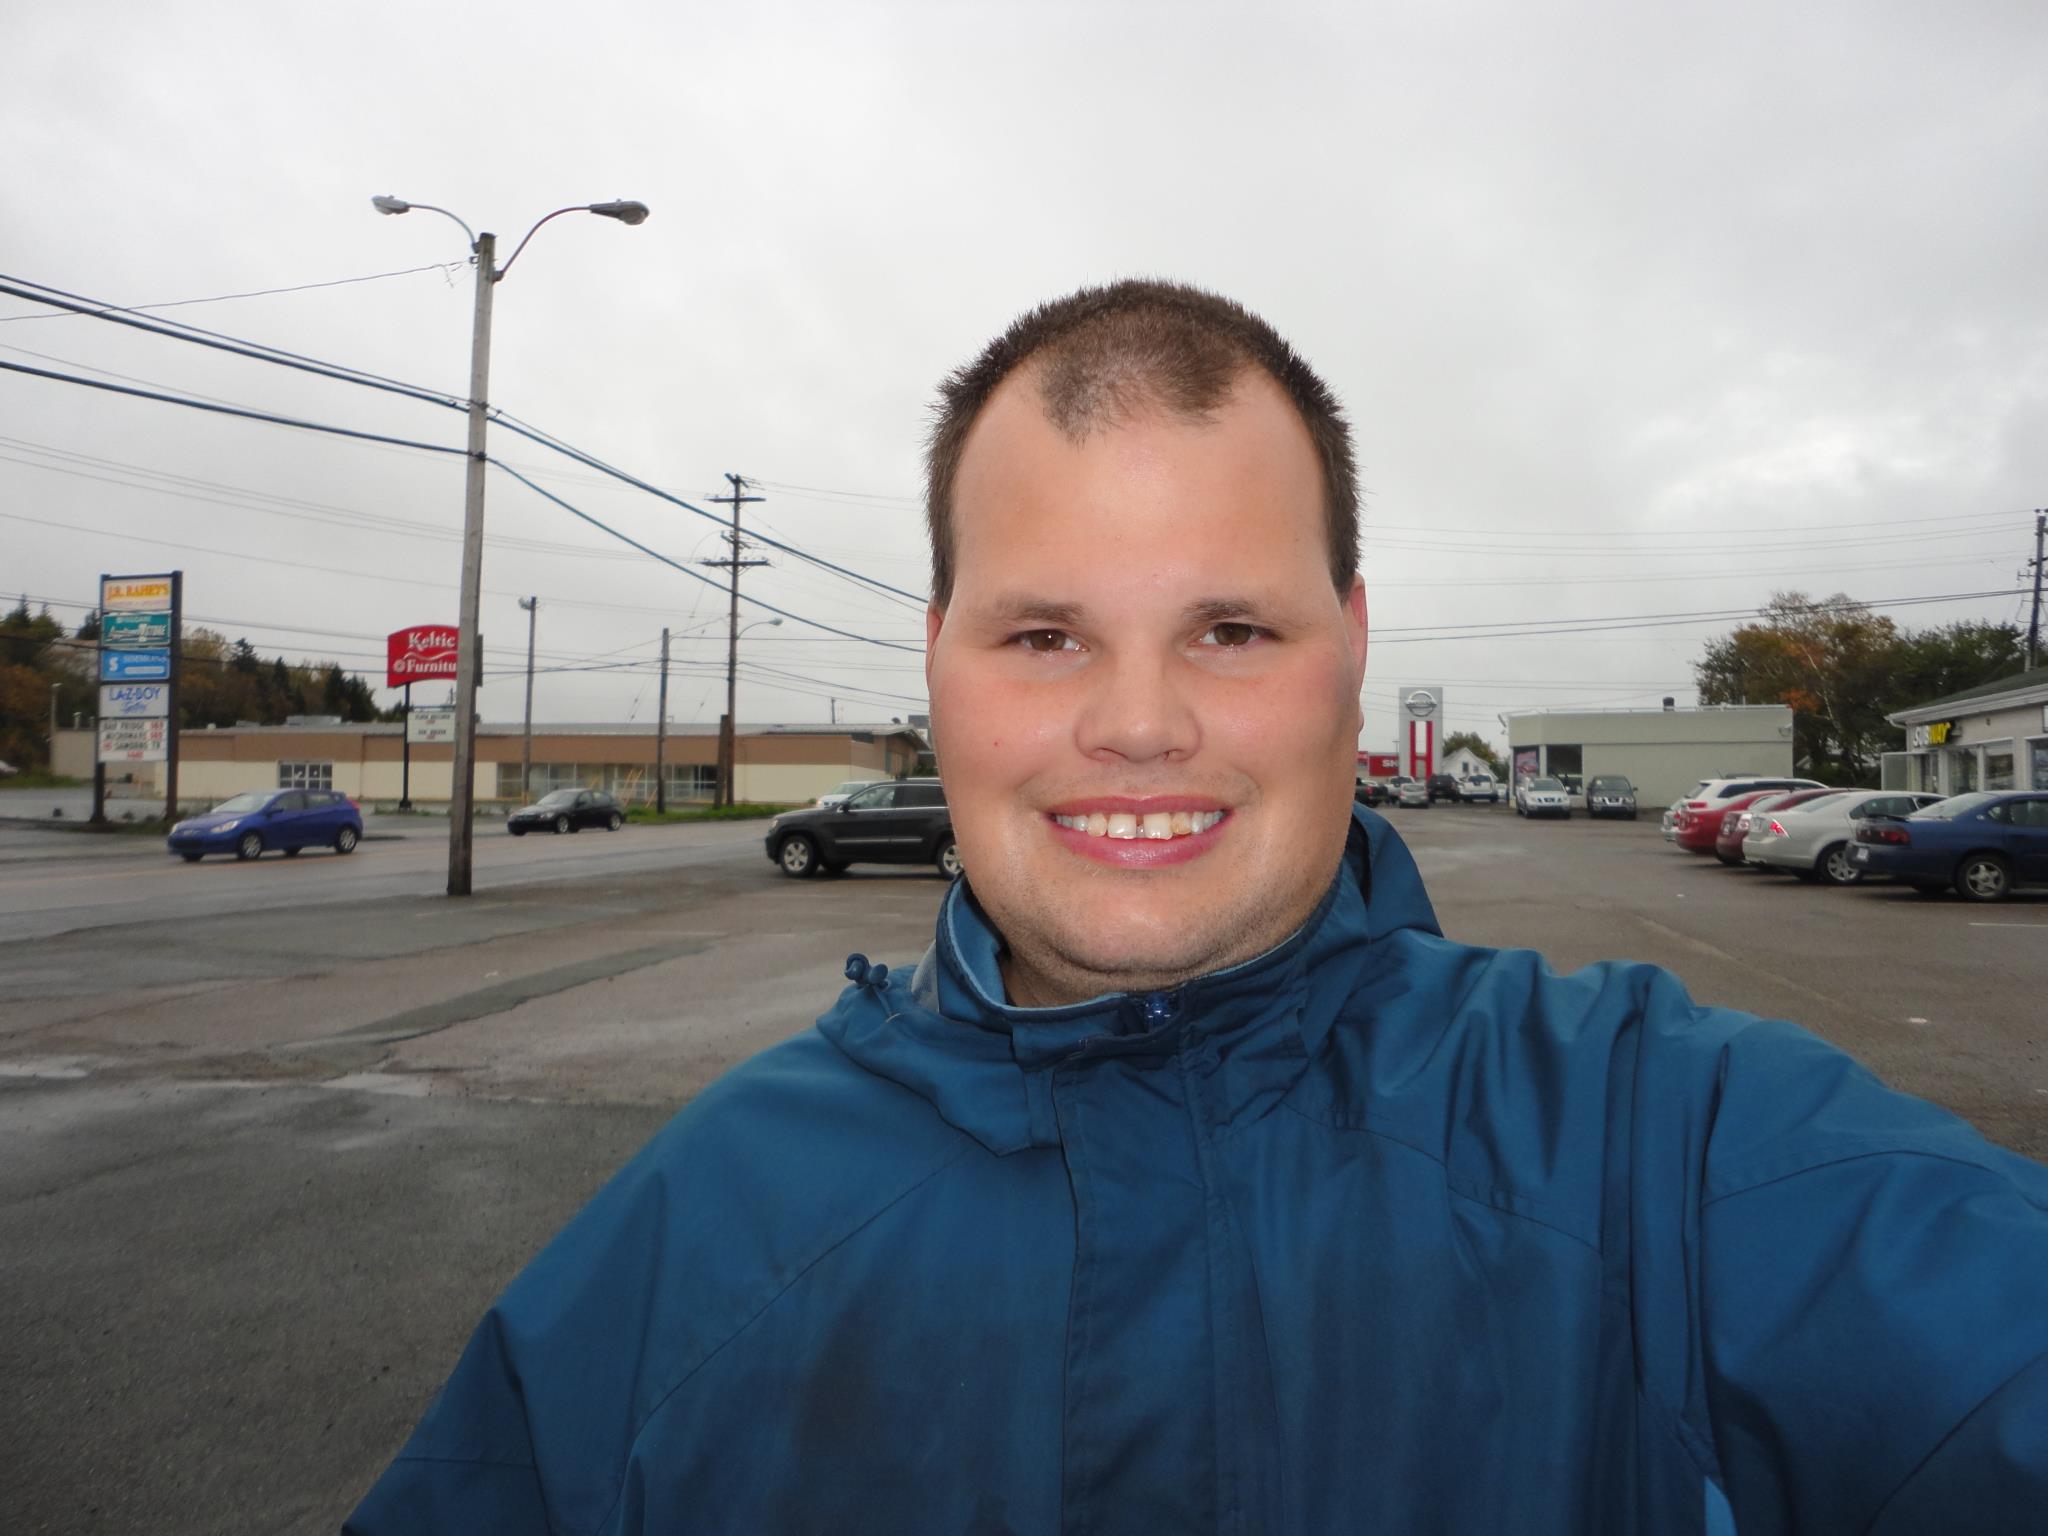 Frankie MacDonald enjoys a day going for a walk and Getting some Fresh Air and the sky is about to Clear Up and Pretty Soon the Halloween will be here then the weather will get much colder after that.